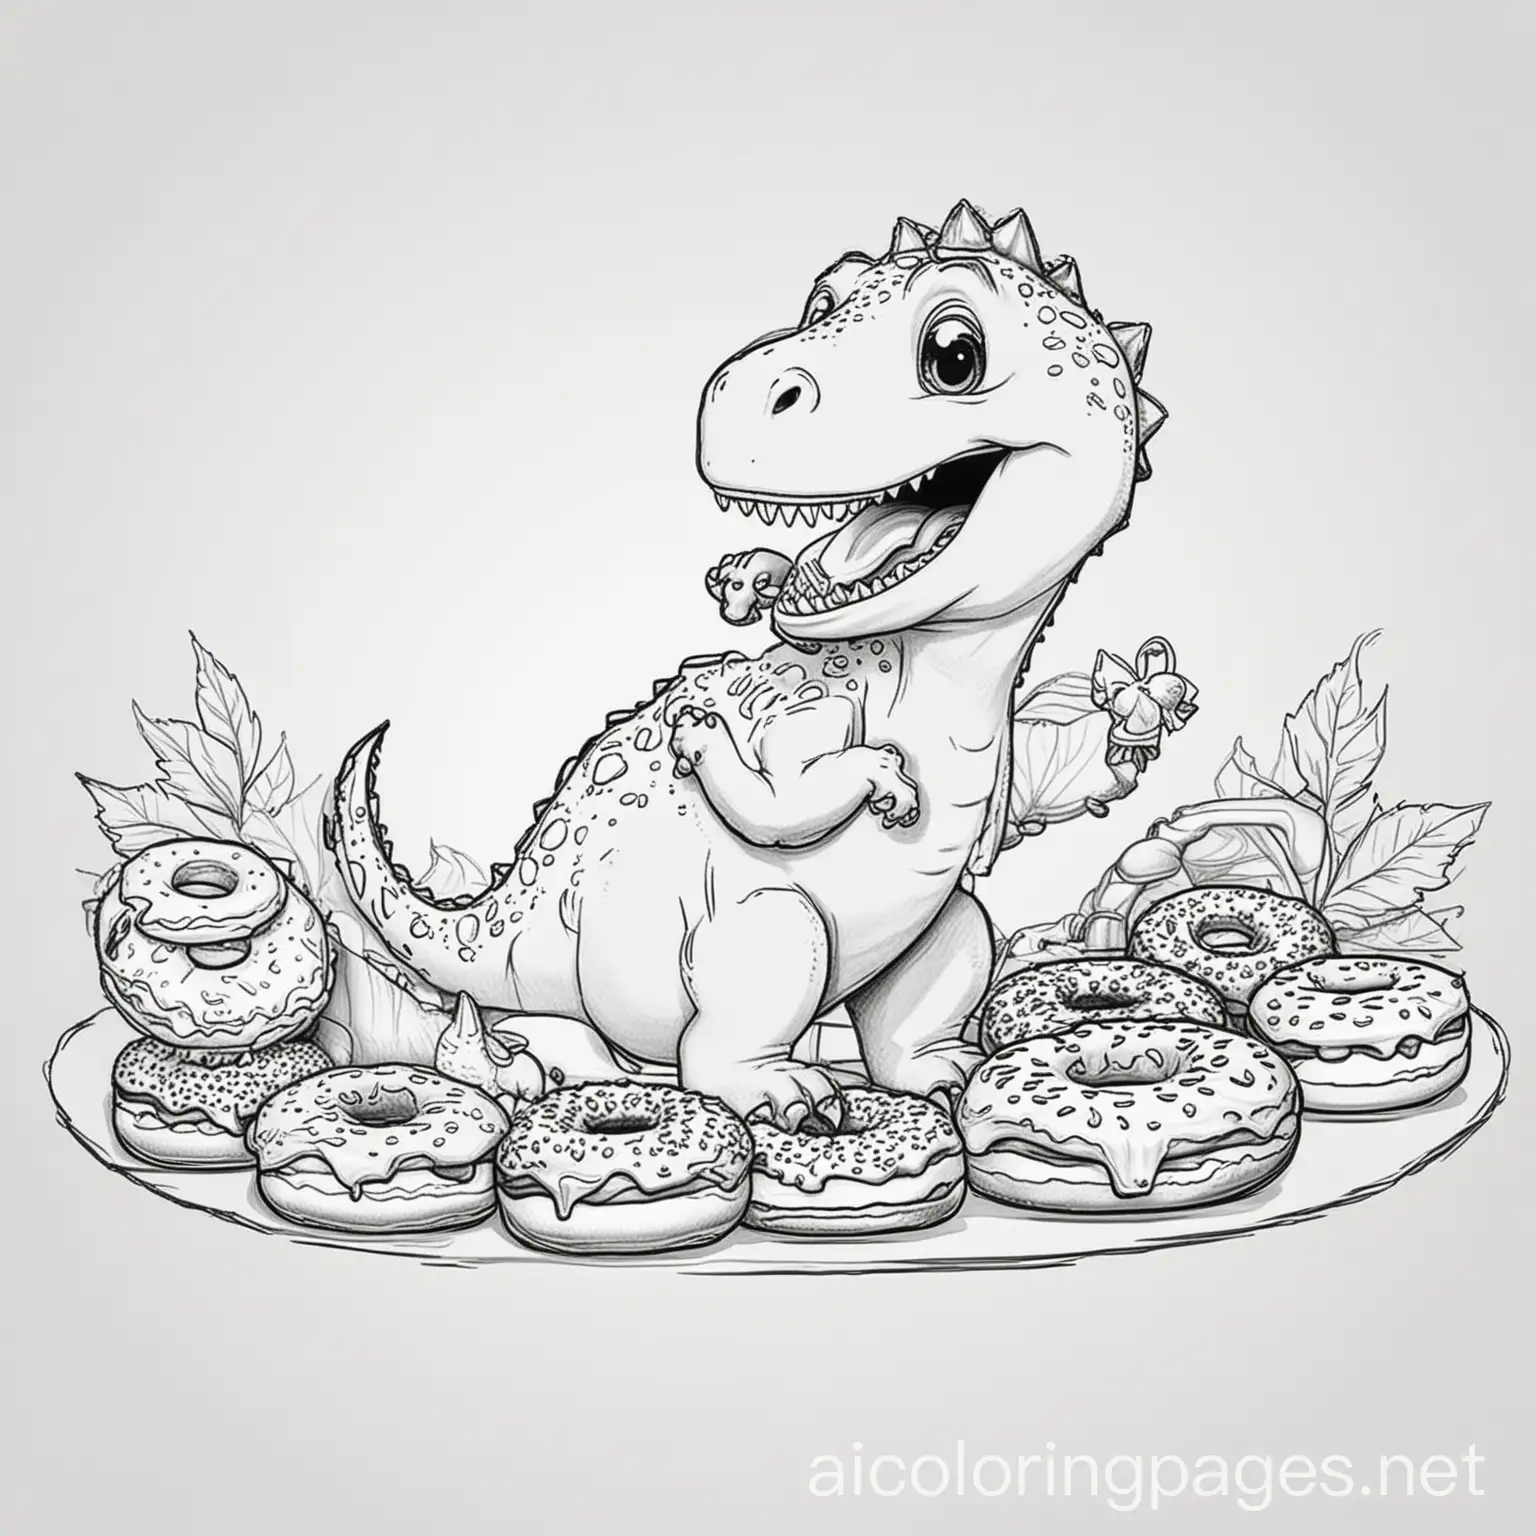 Dinosaur-Eating-Donuts-Coloring-Page-Black-and-White-Line-Art-for-Kids